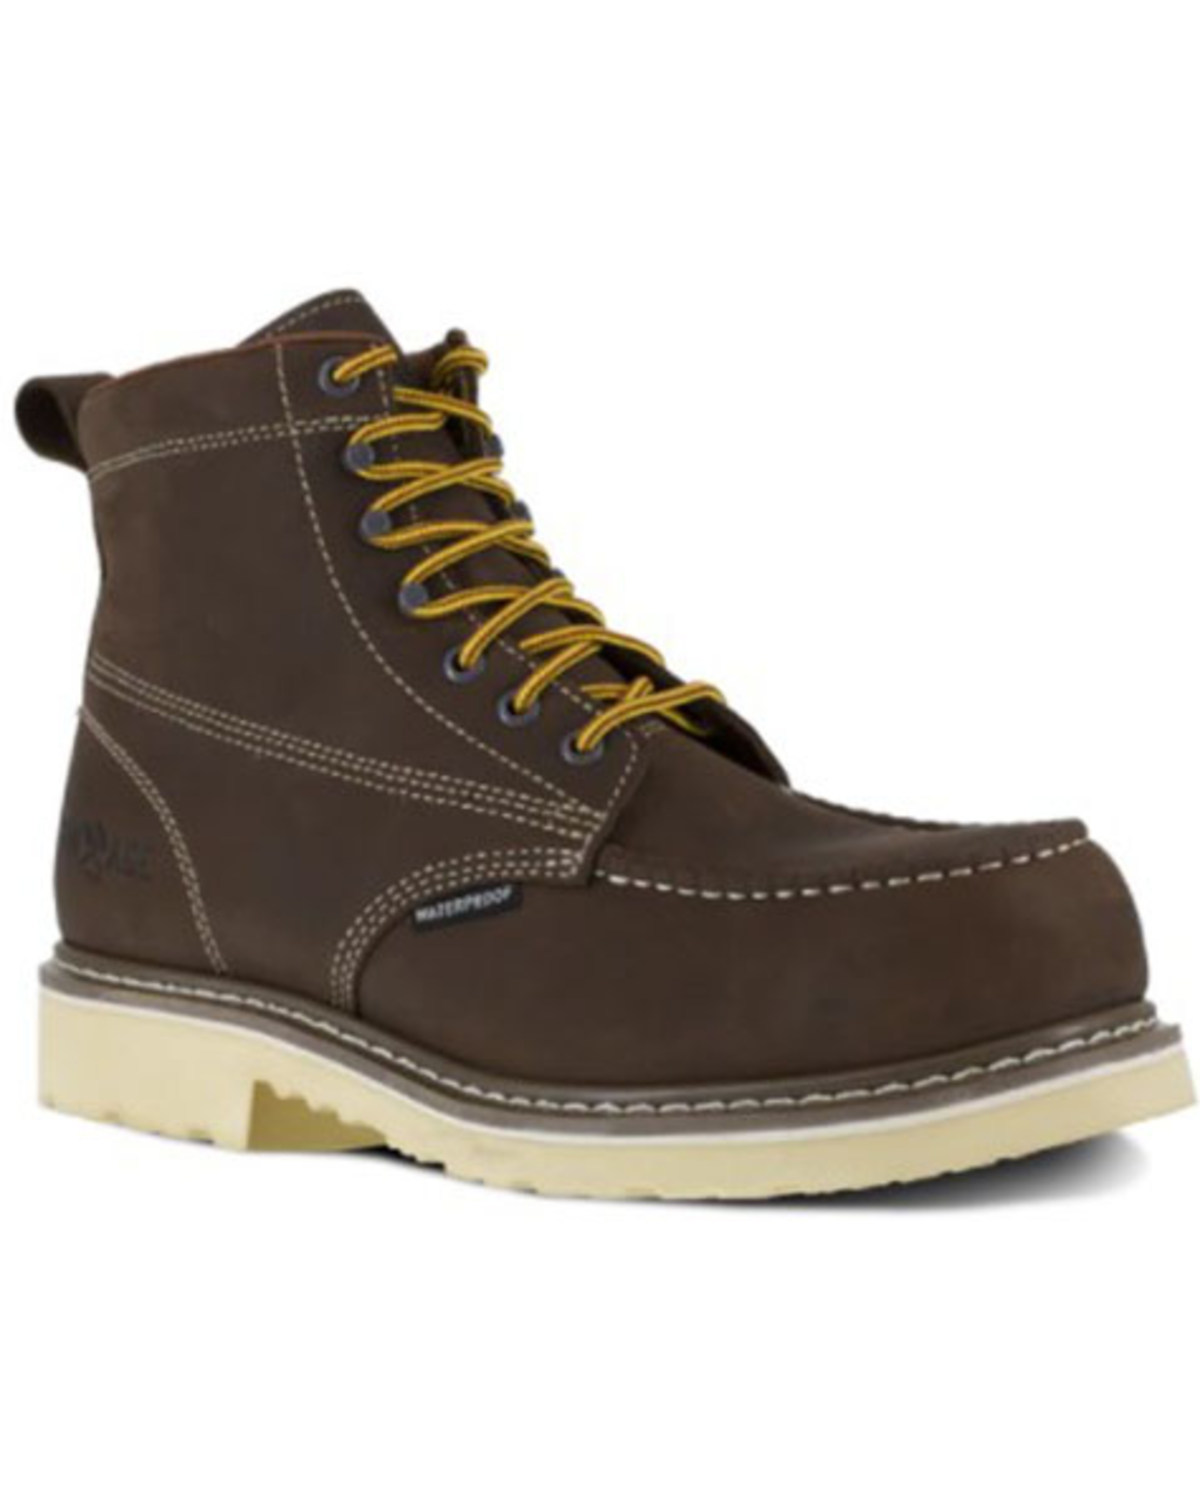 Iron Age Men's Solidifier Waterproof Work Boots